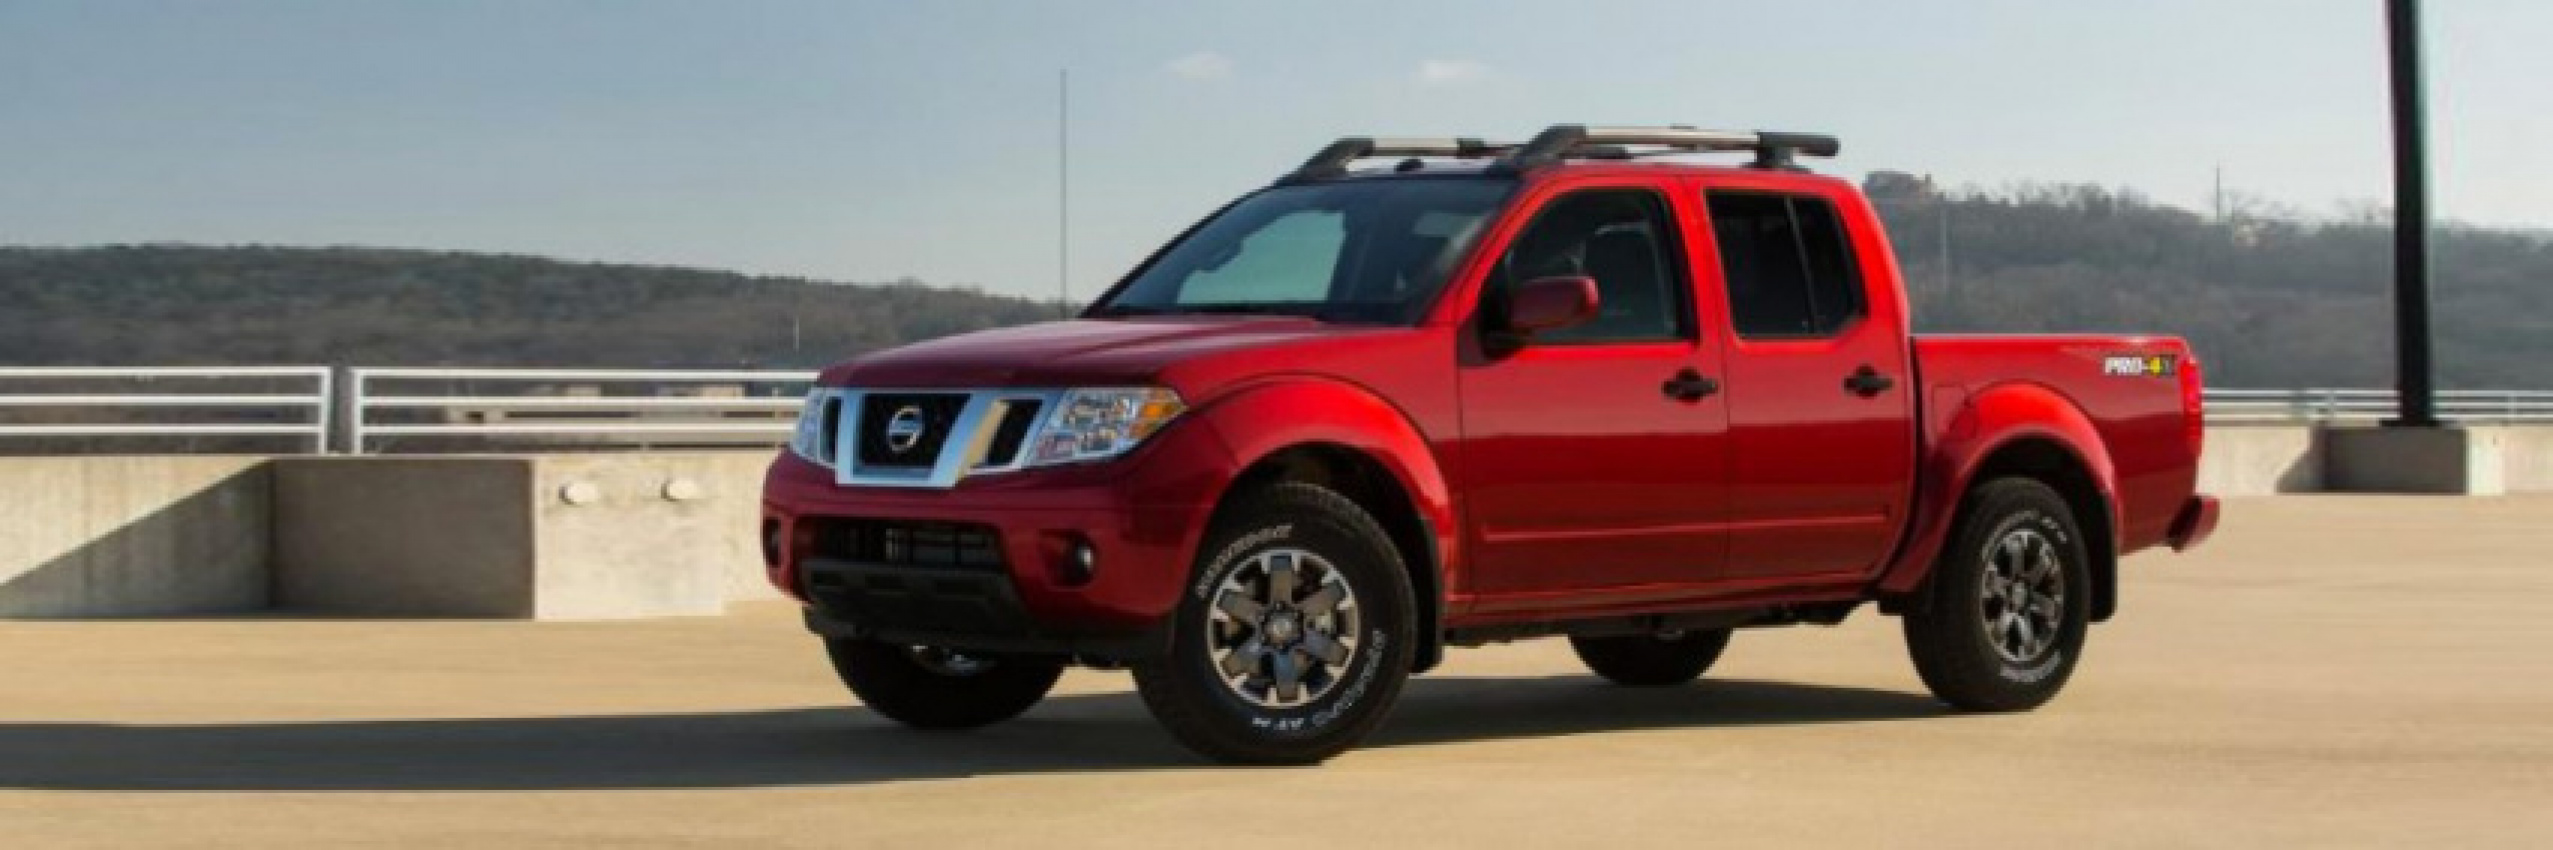 autos, cars, nissan, nissan frontier, there’s a new nissan frontier: how is resale value for older ones?